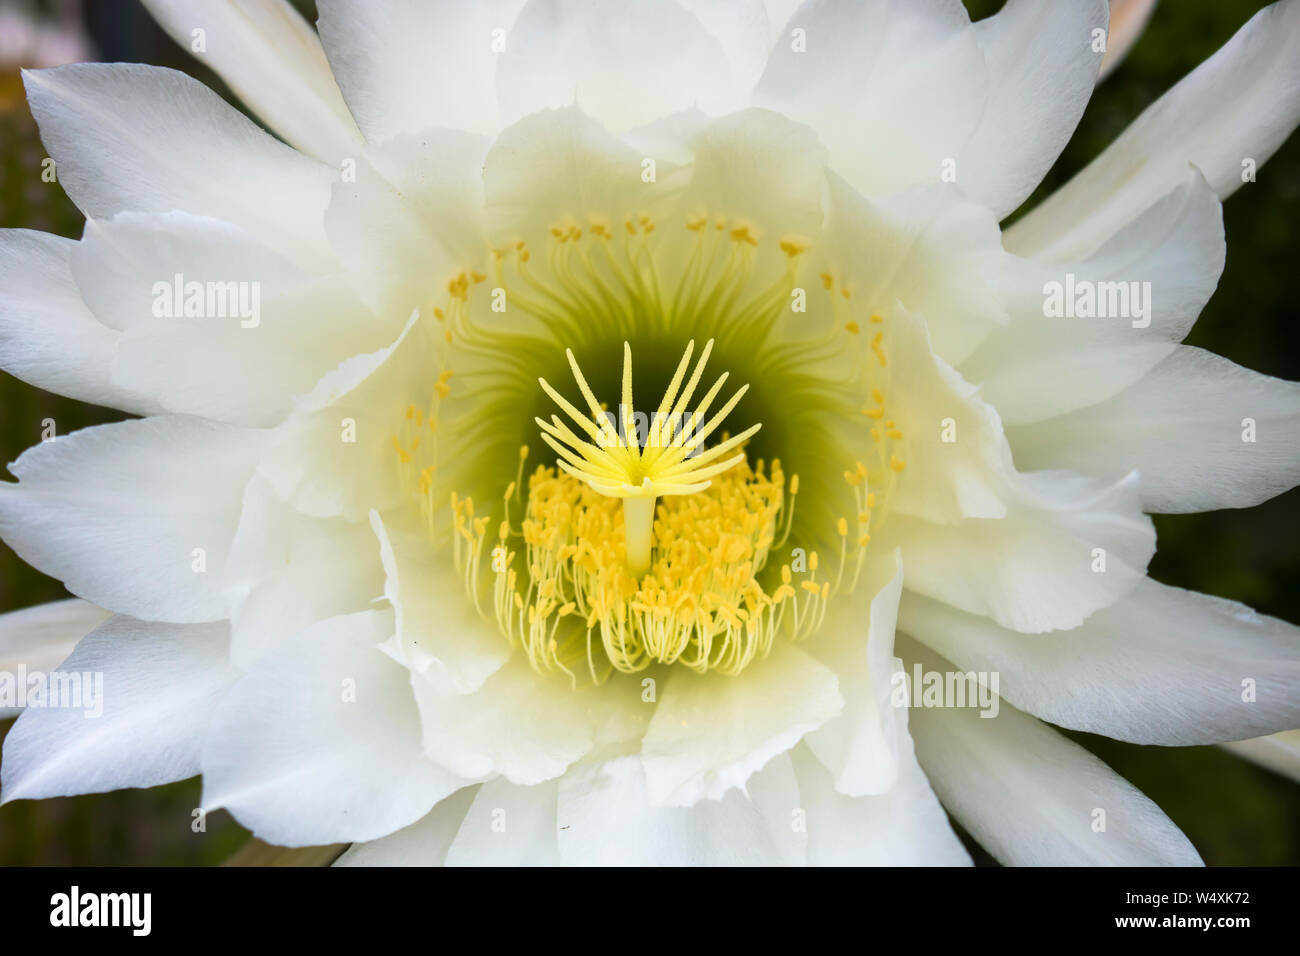 Lush blooming large cactus flower close up with white petals and yellow details. Stock Photo